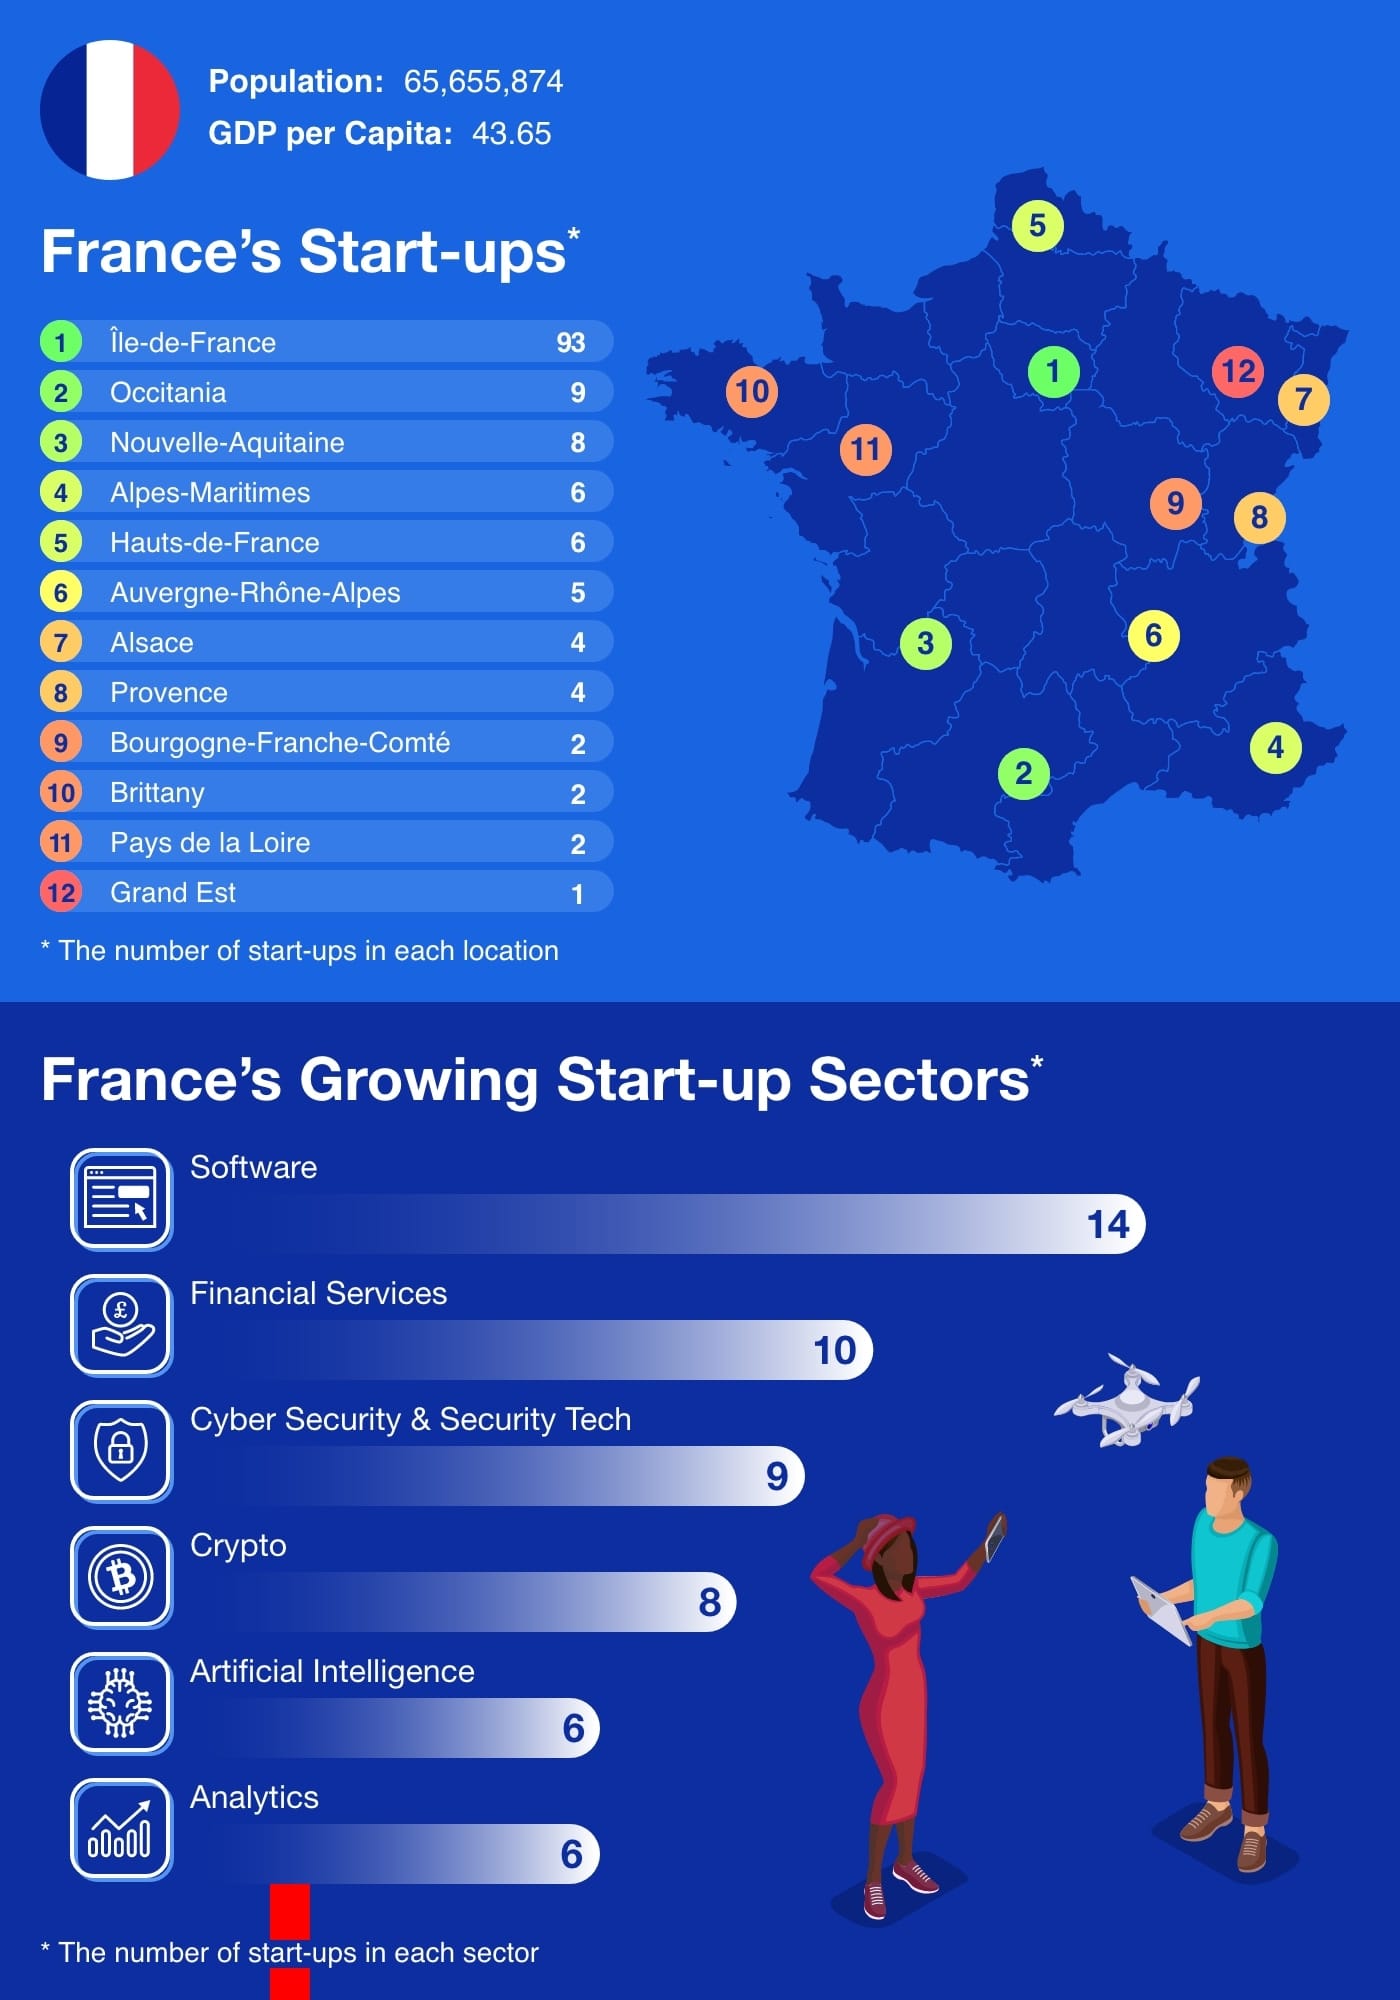 Infographic showing the number of France's start-ups by location and sector